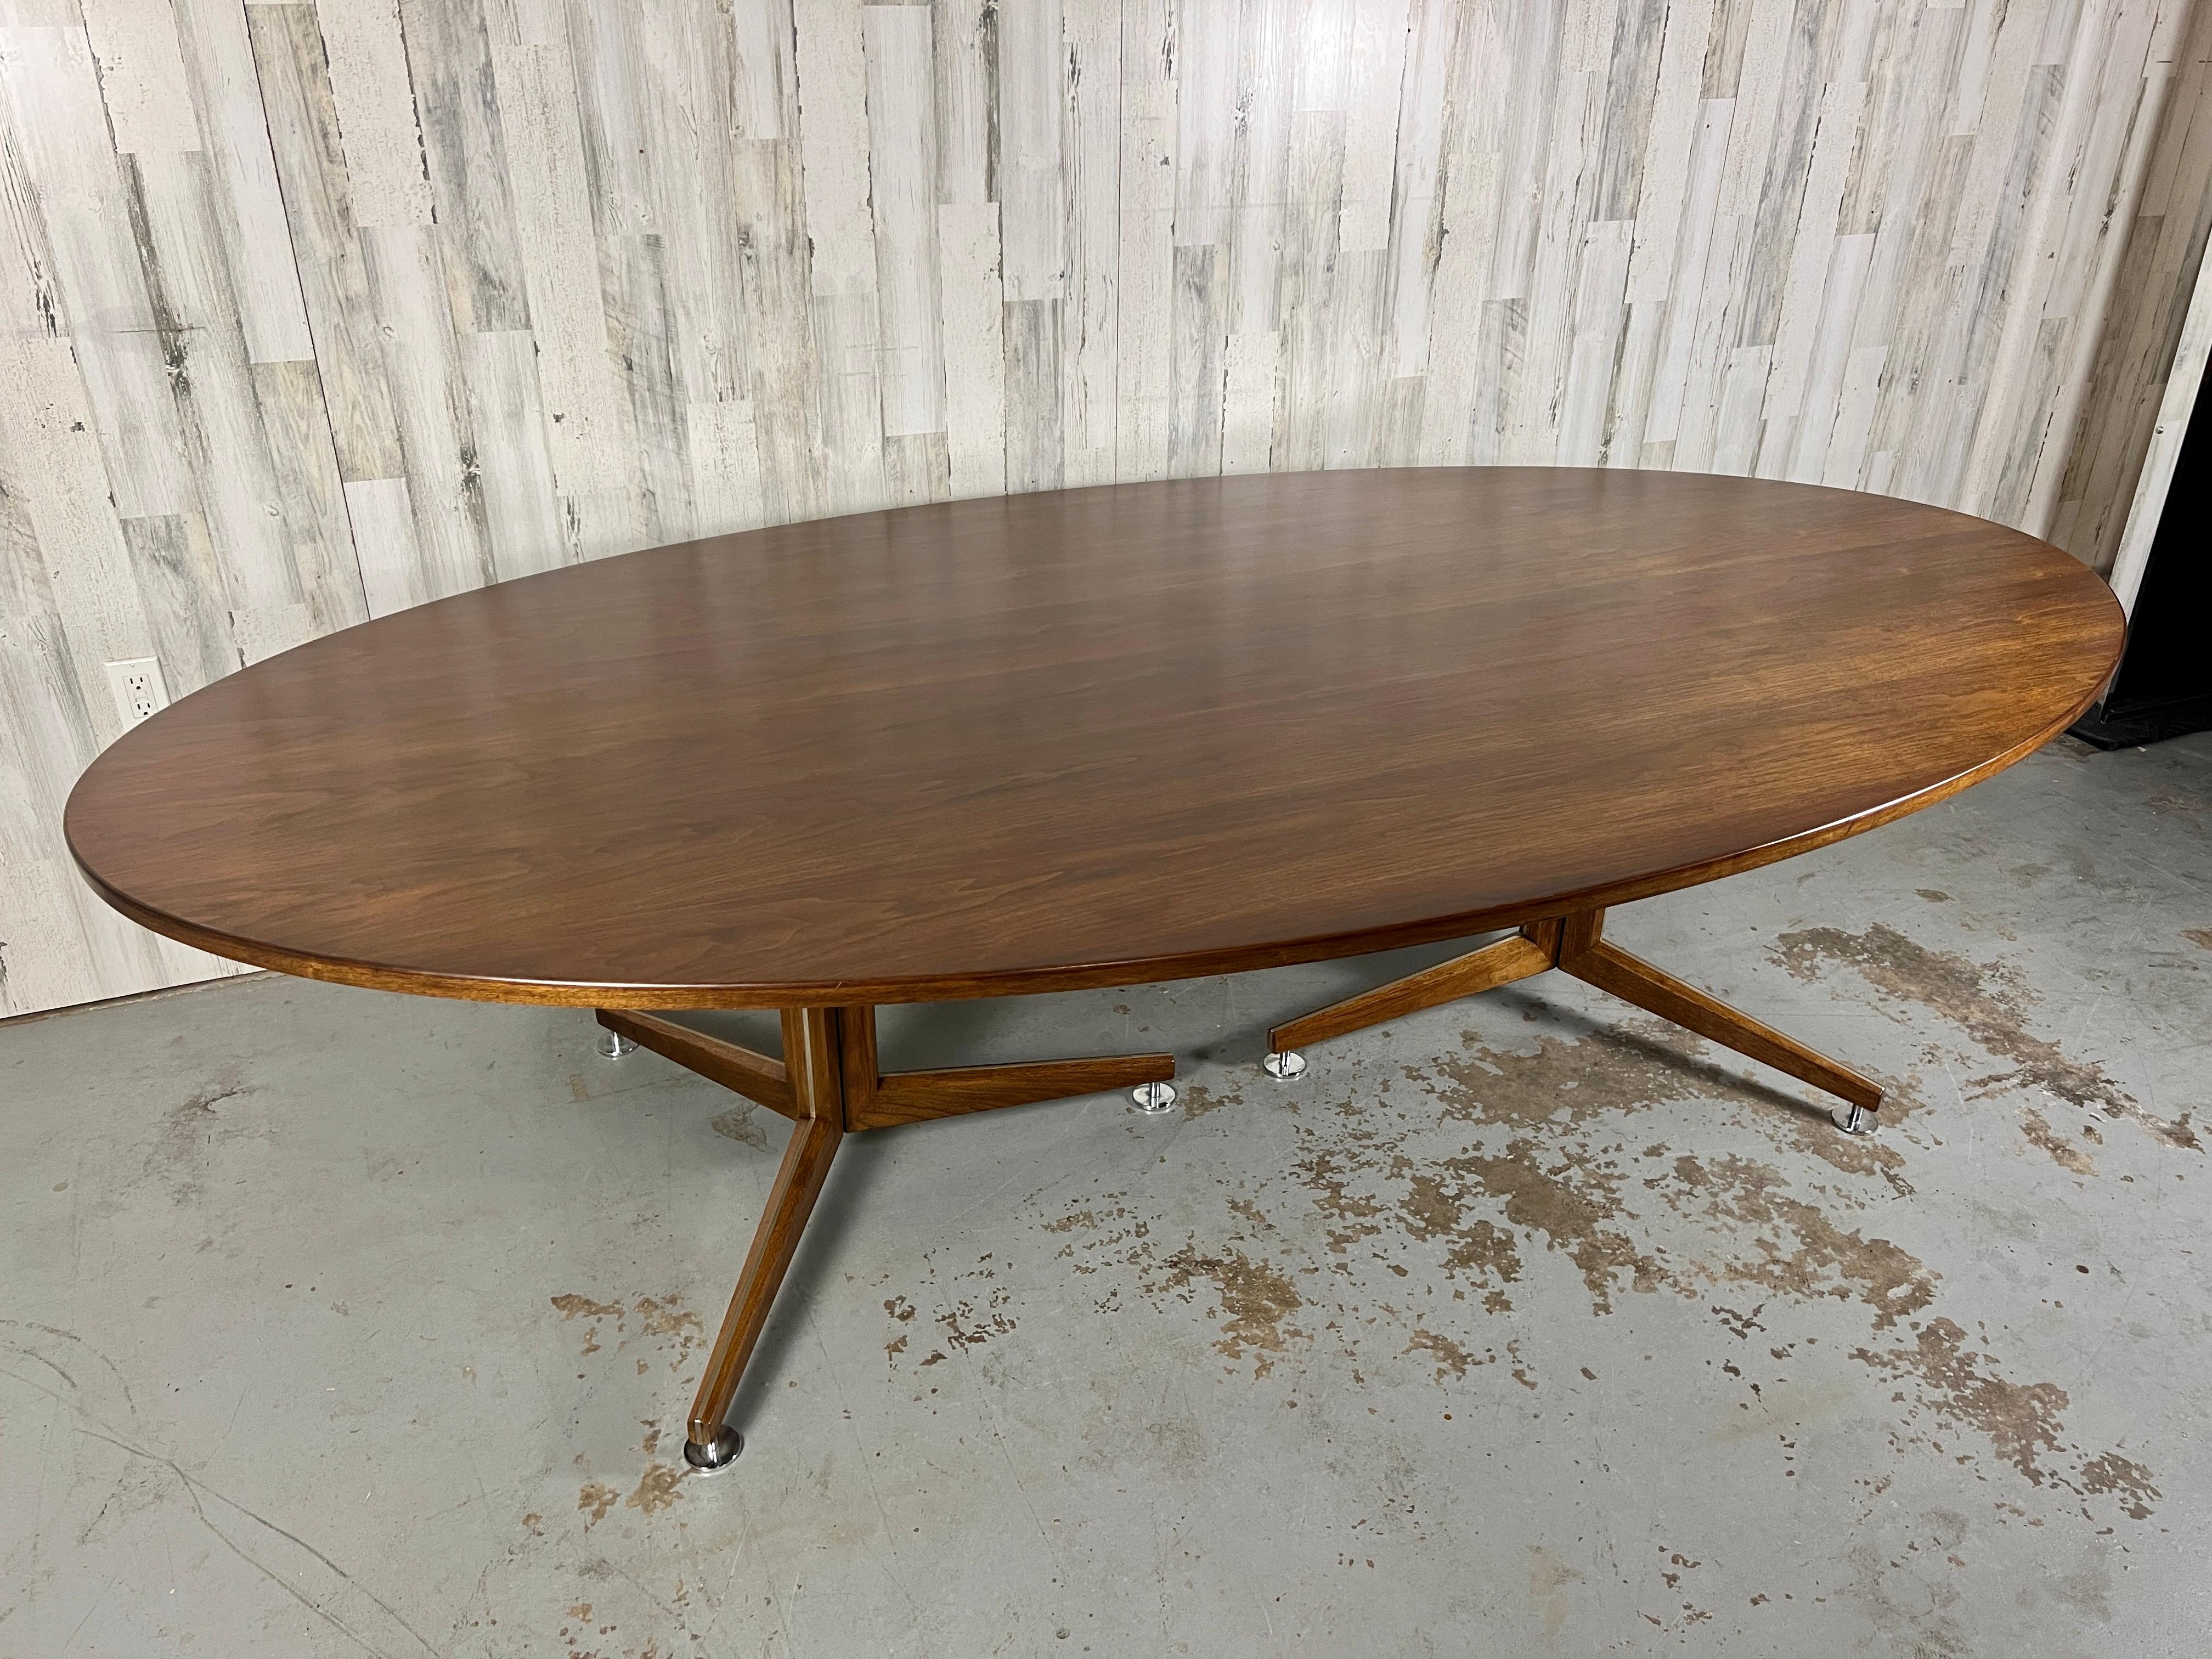 Edward Wormley for Dunbar Elliptical Conference / Dining Table In Good Condition For Sale In Denton, TX